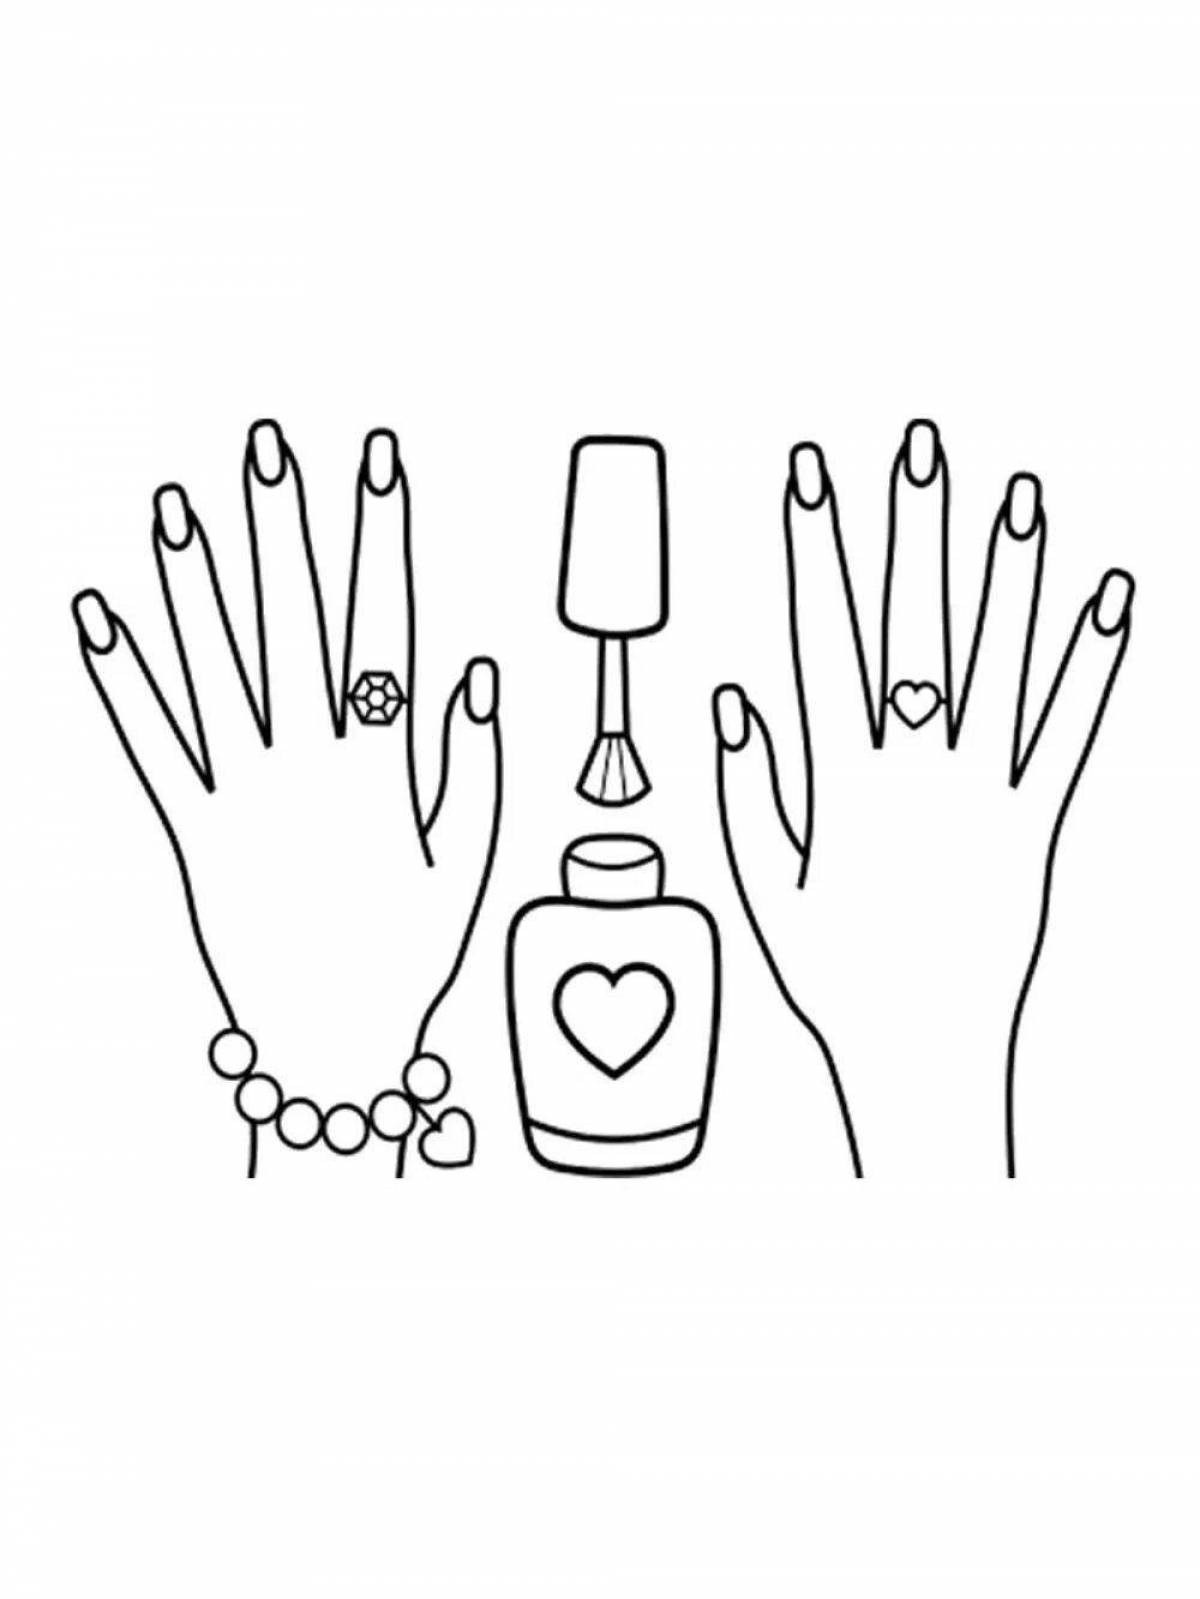 Coloring page violent female hand